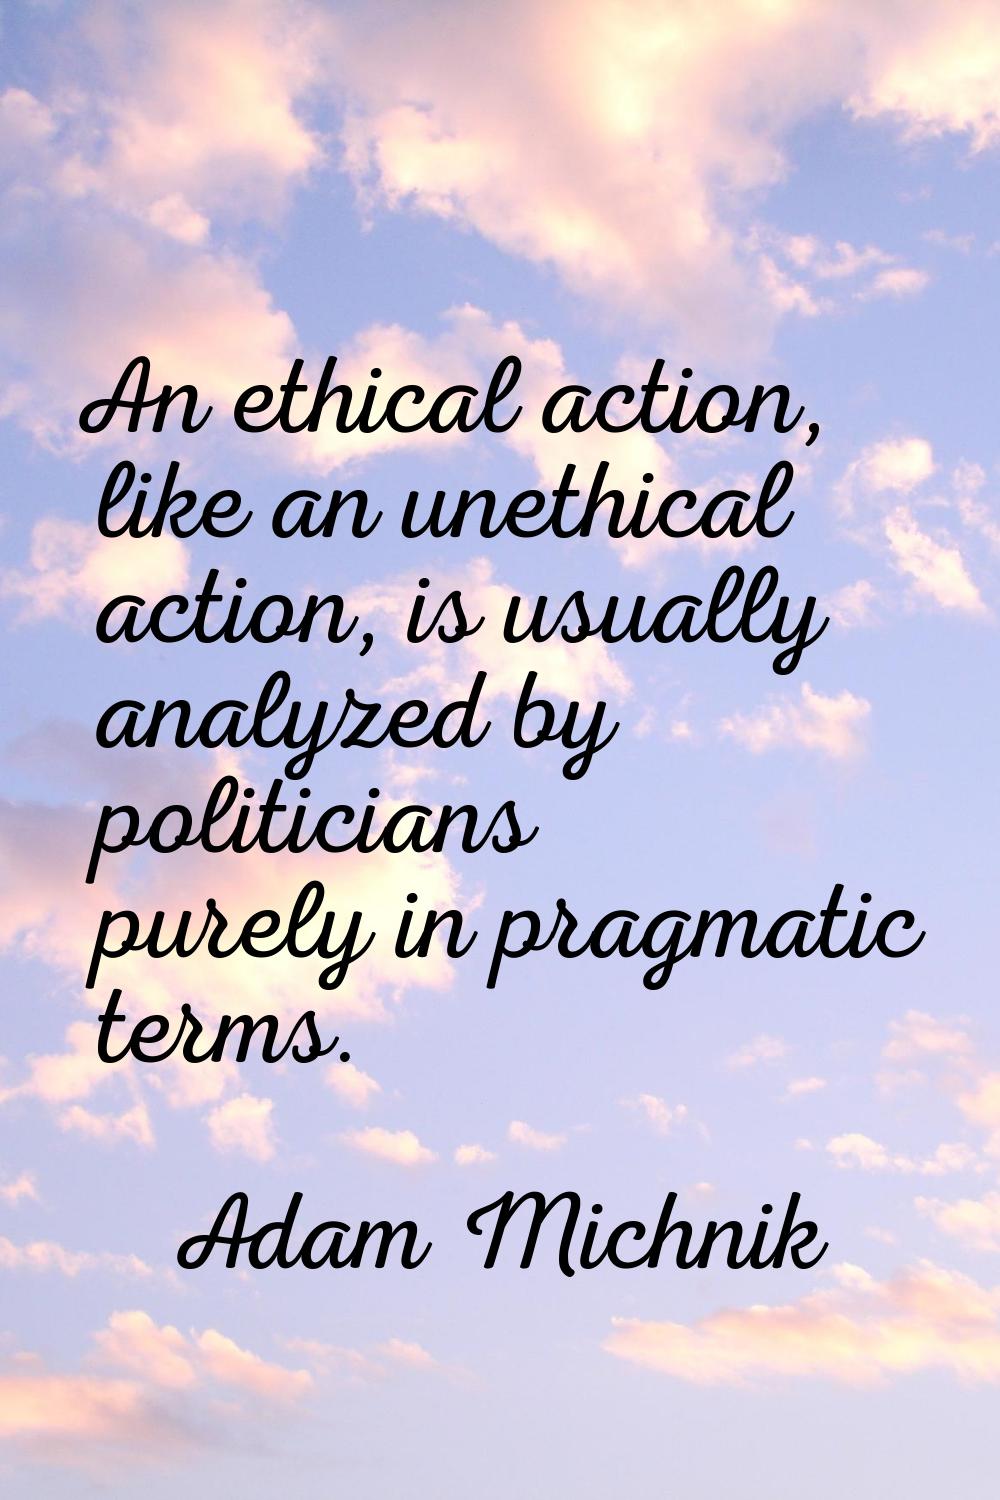 An ethical action, like an unethical action, is usually analyzed by politicians purely in pragmatic